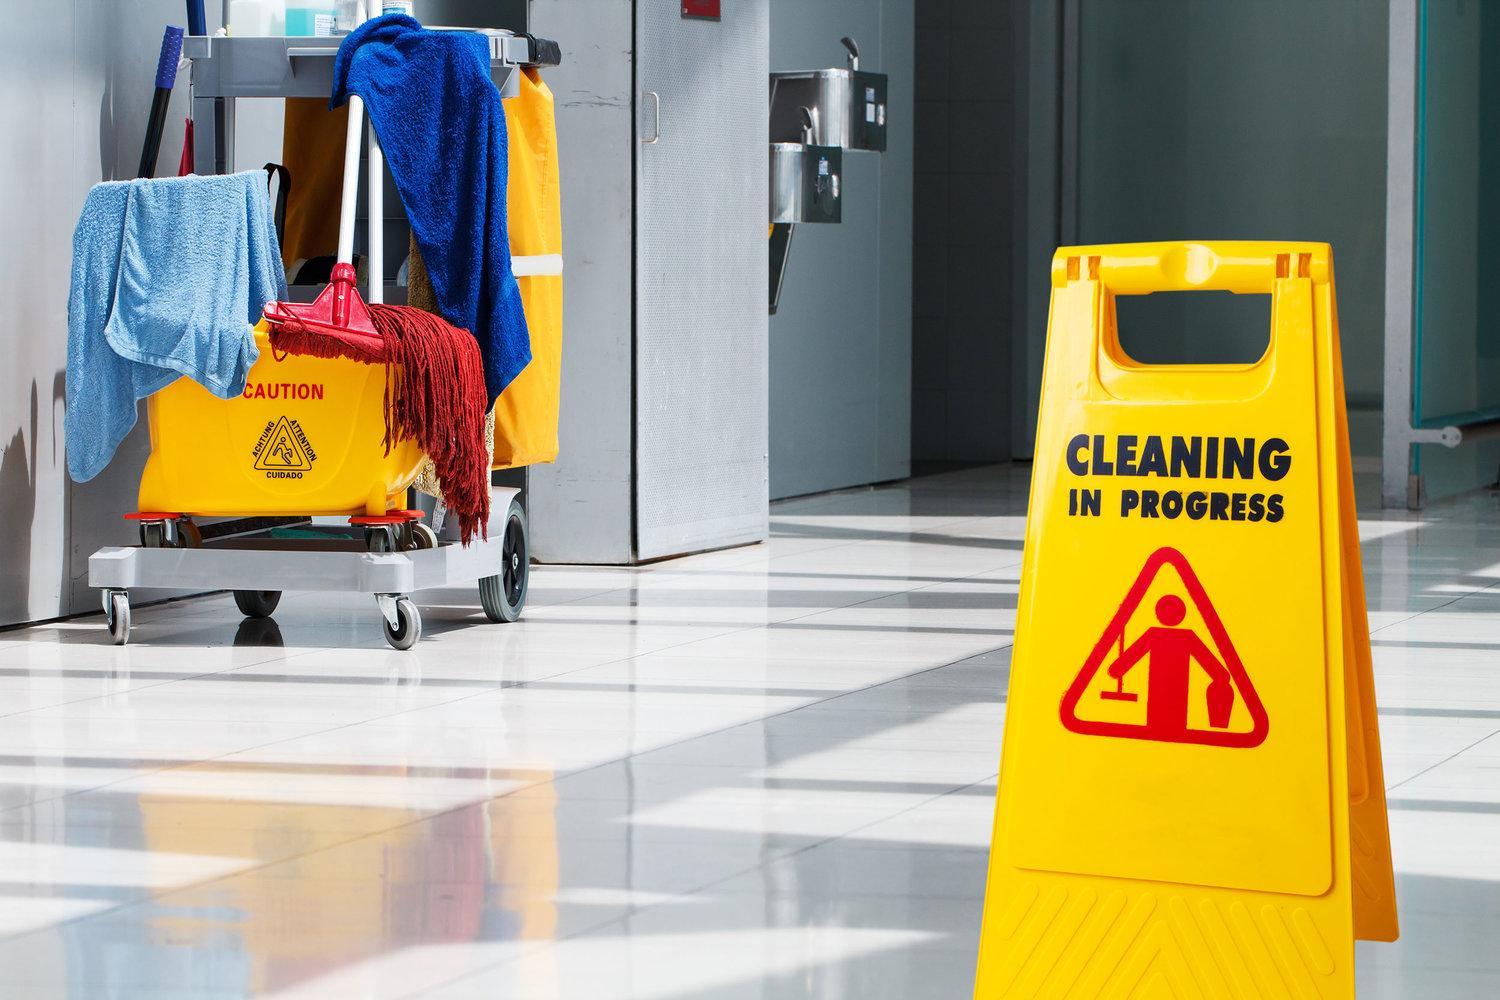 All Pro's Janitorial services